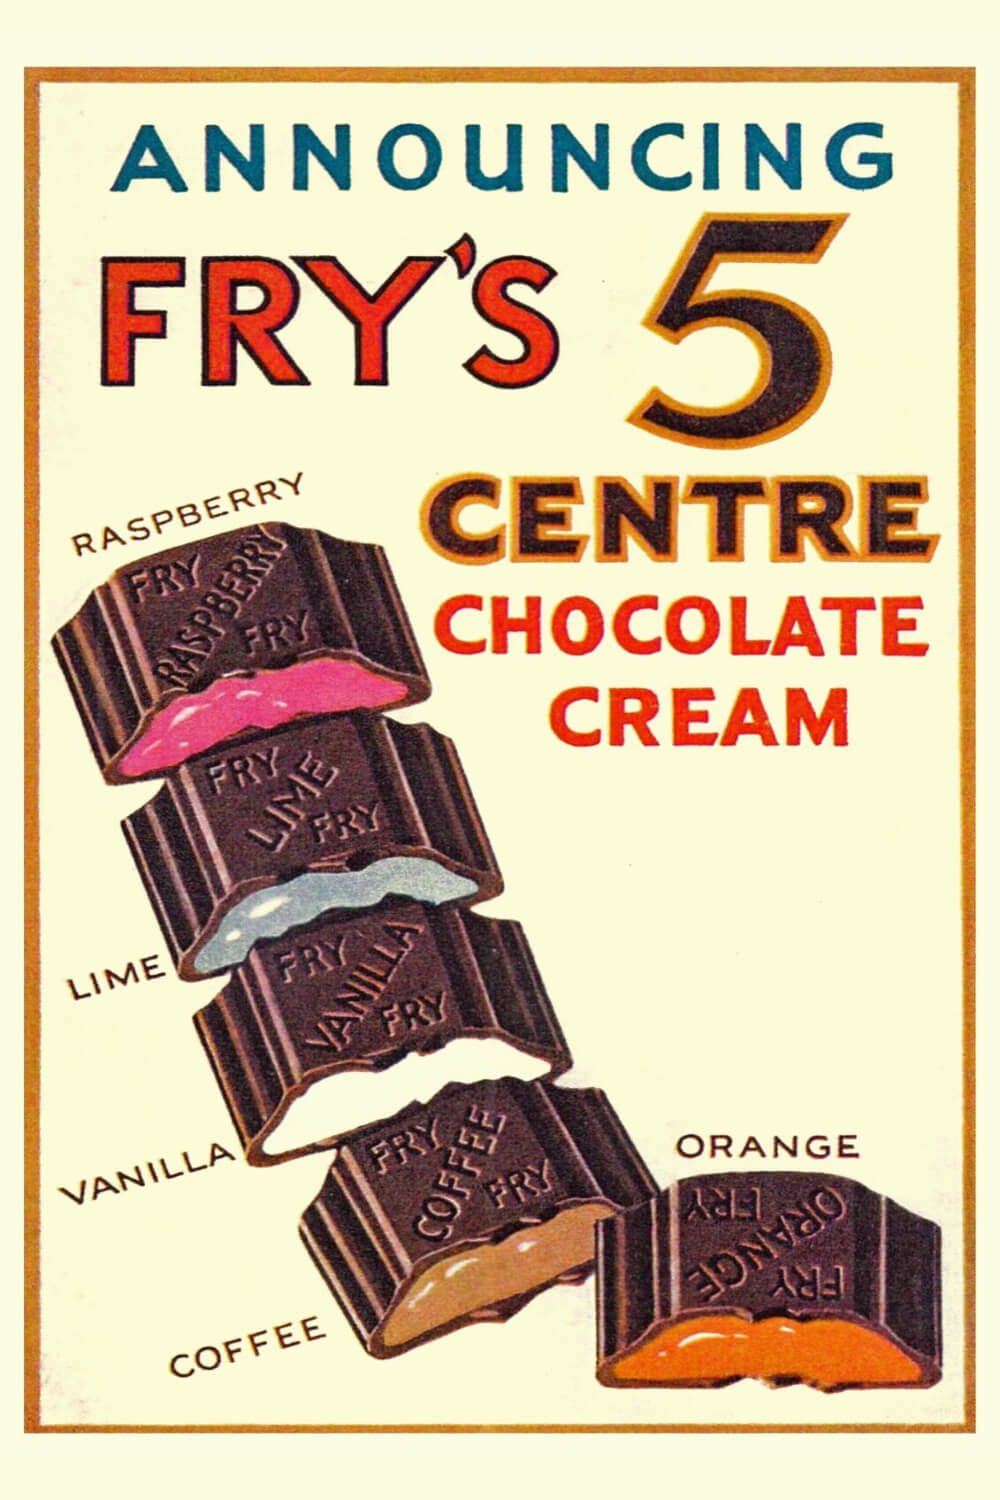 Vintage advert for Fry's 5 Centre Chocolate cream from 1934